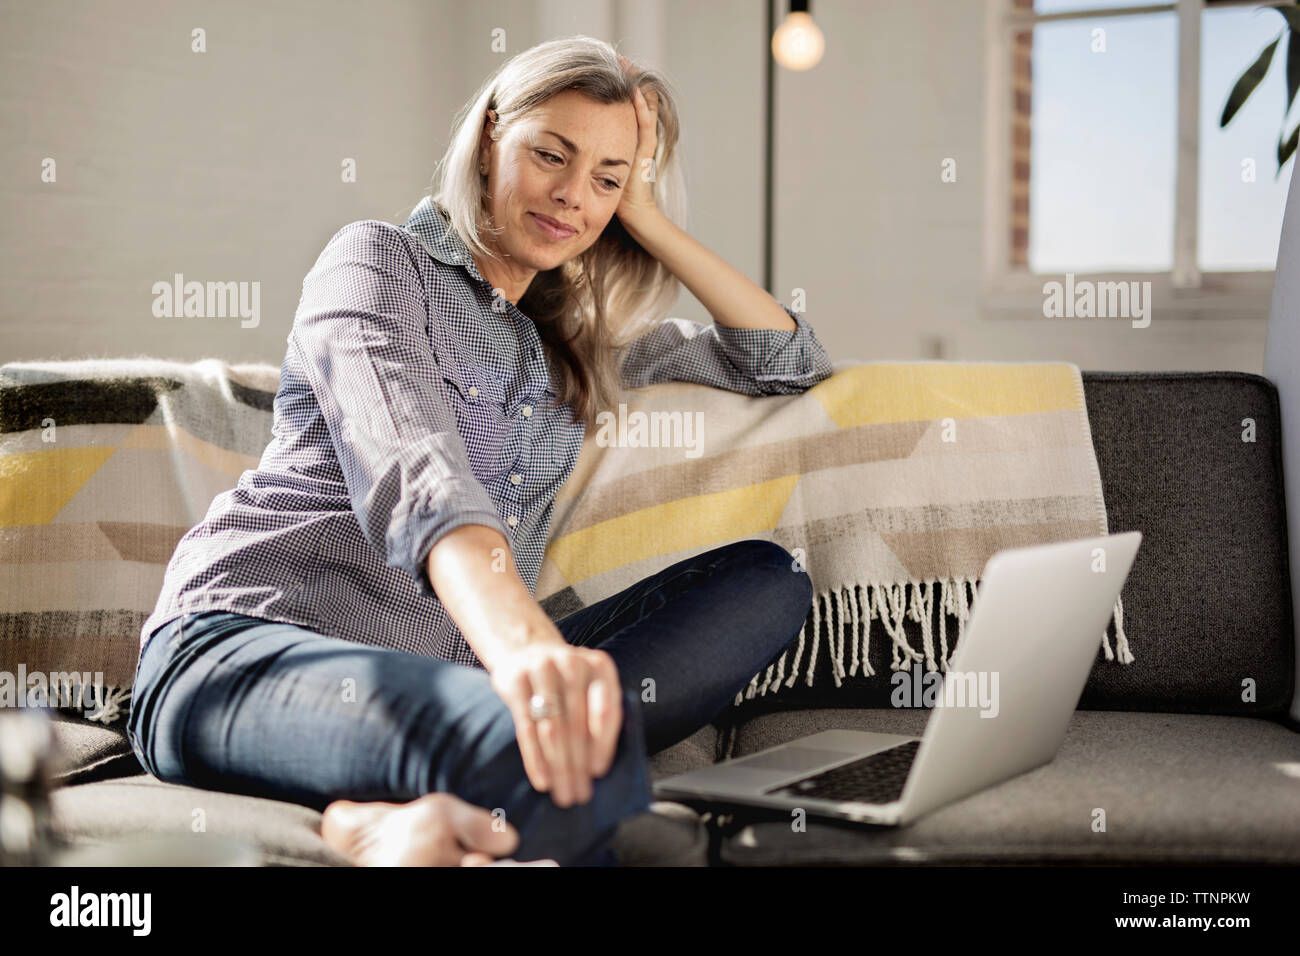 Relaxed woman with laptop sitting on sofa Stock Photo